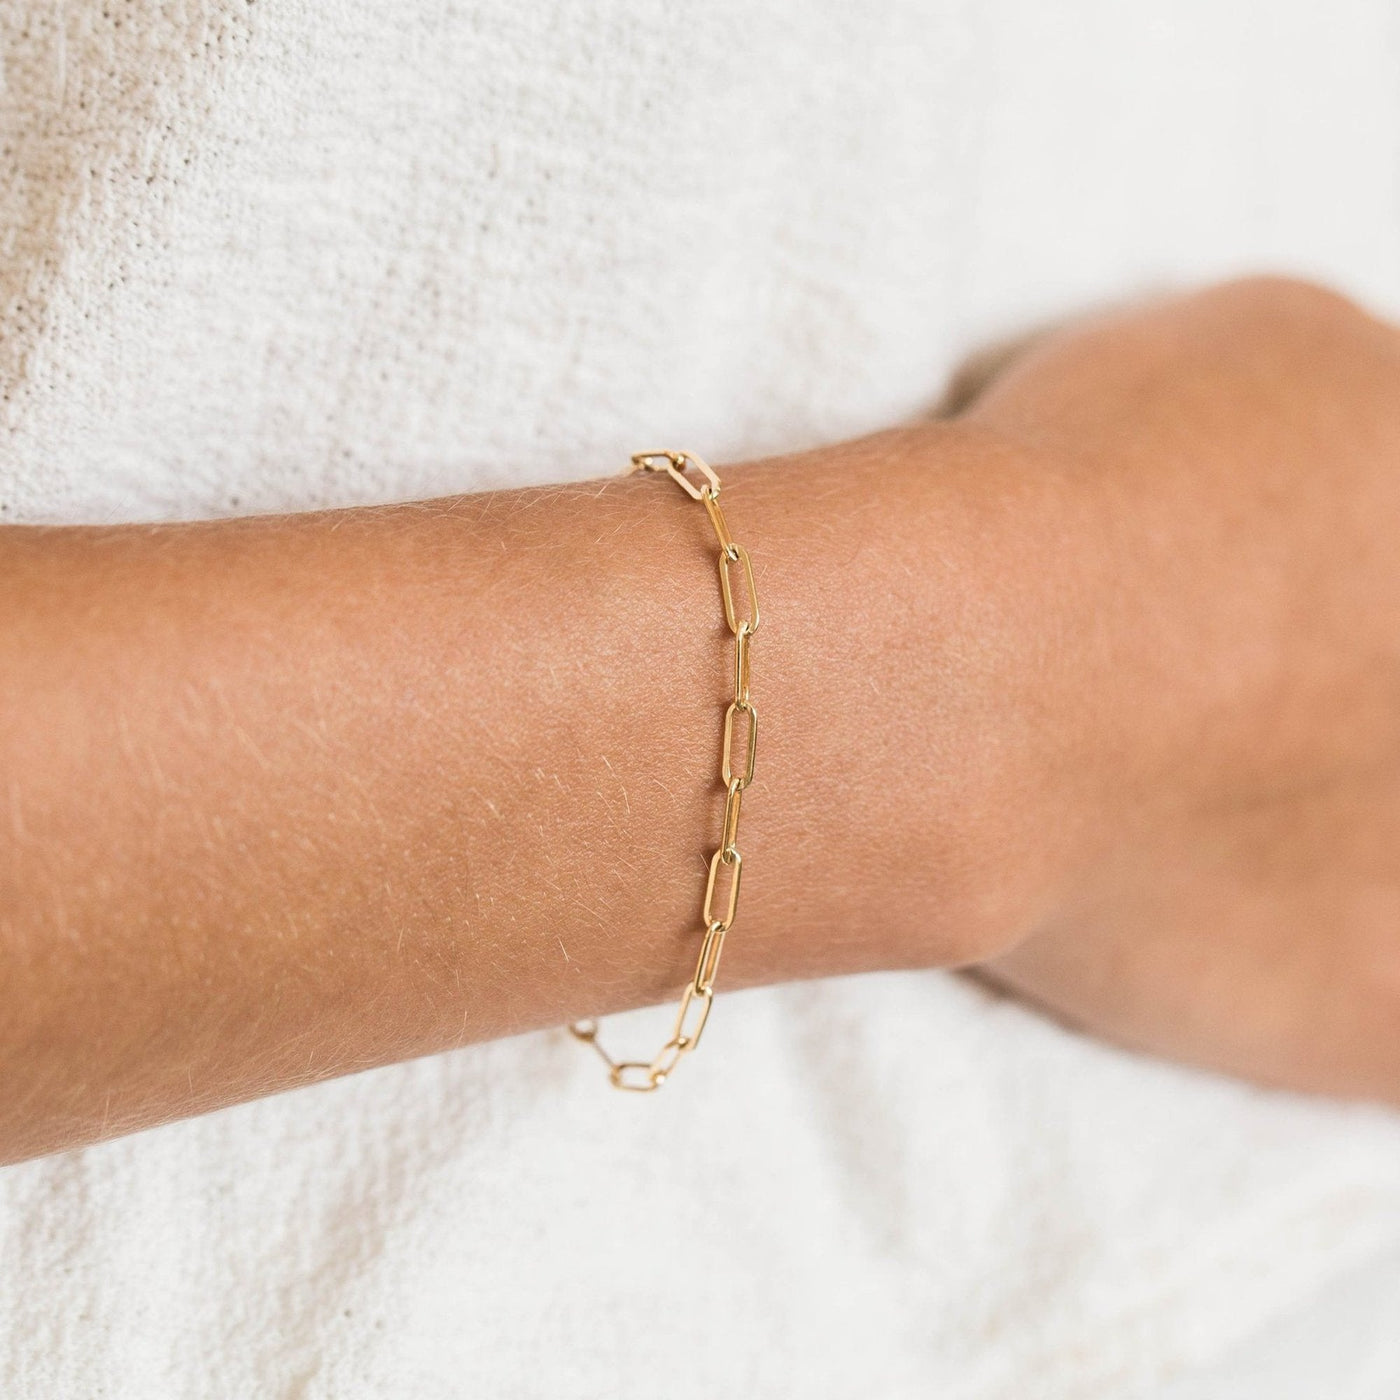 14K Gold Filled or Sterling Silver Paperclip Chain Bracelet • Dainty  Paperclip Chain Bracelet • Beaucoupdebeads • B329